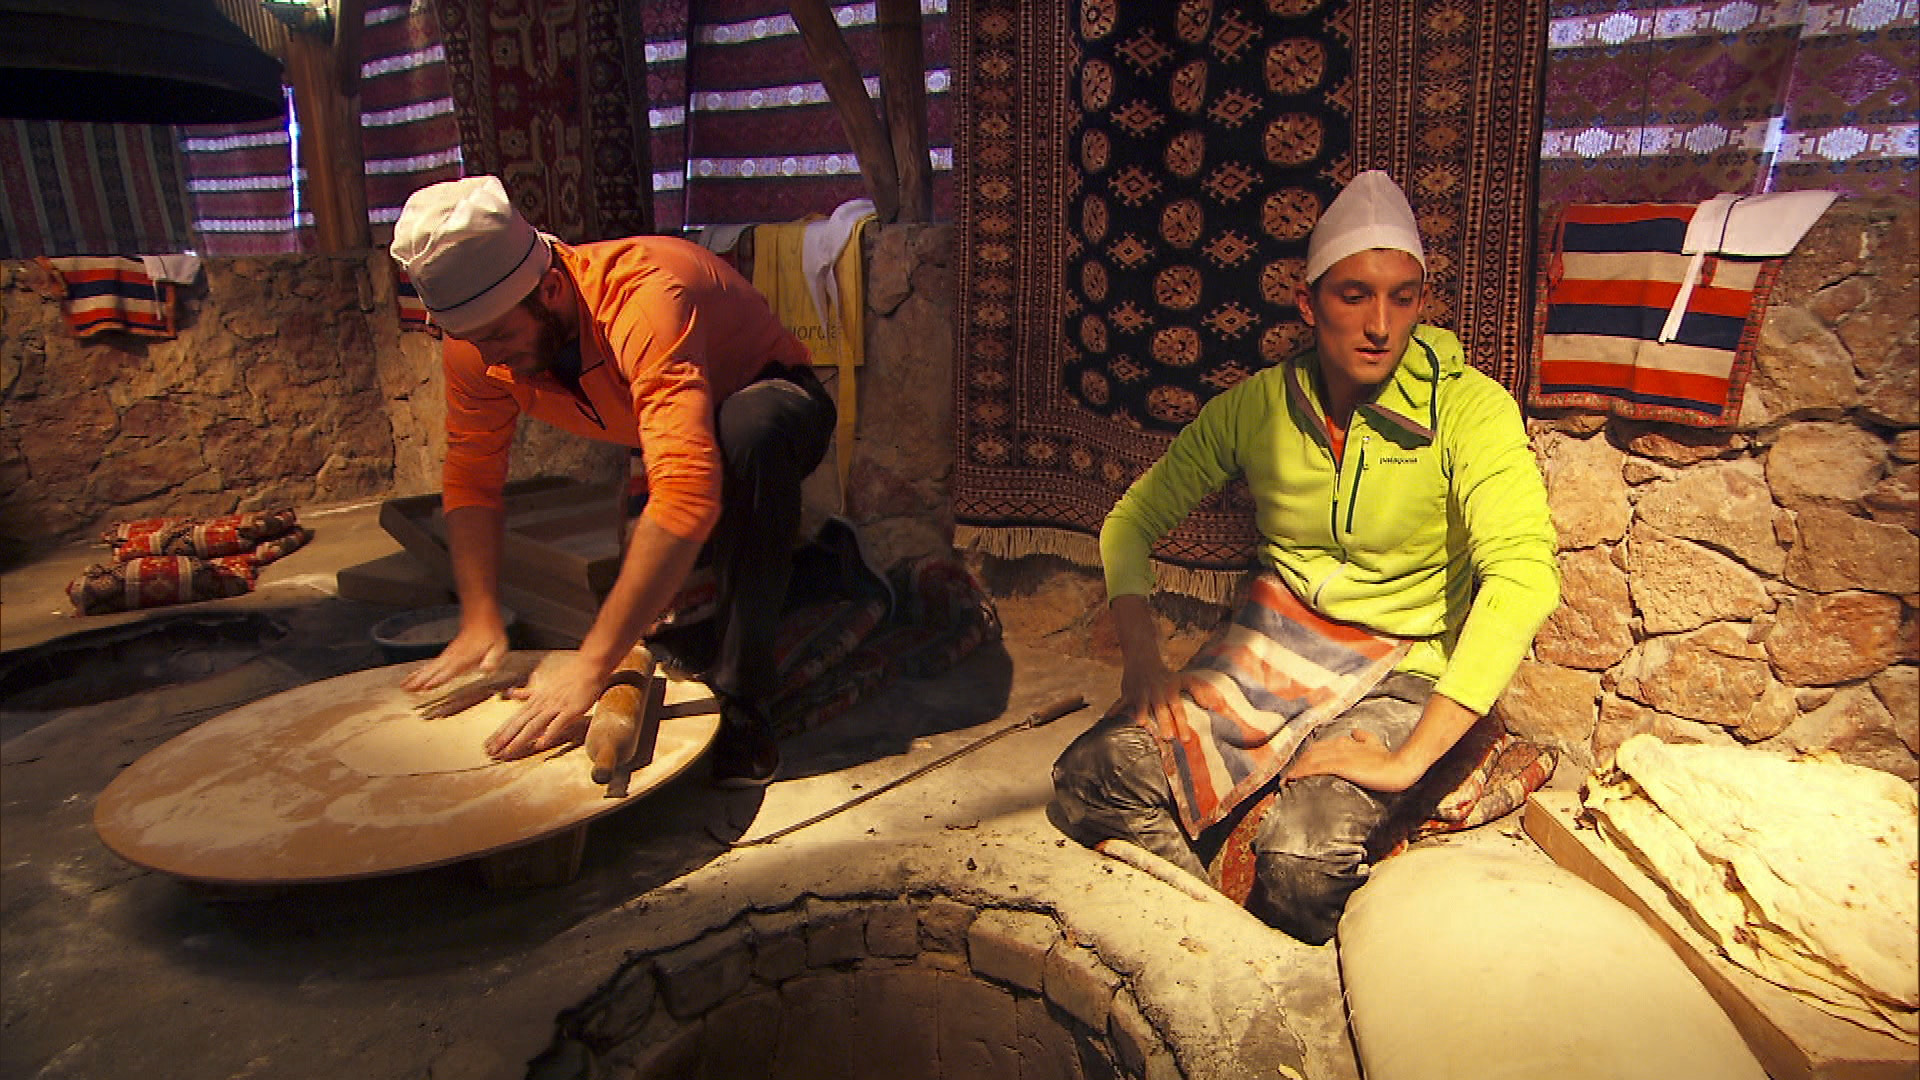 In Detour B, Brodie and Kurt bake 15 lavash breads in order to receive the next clue.